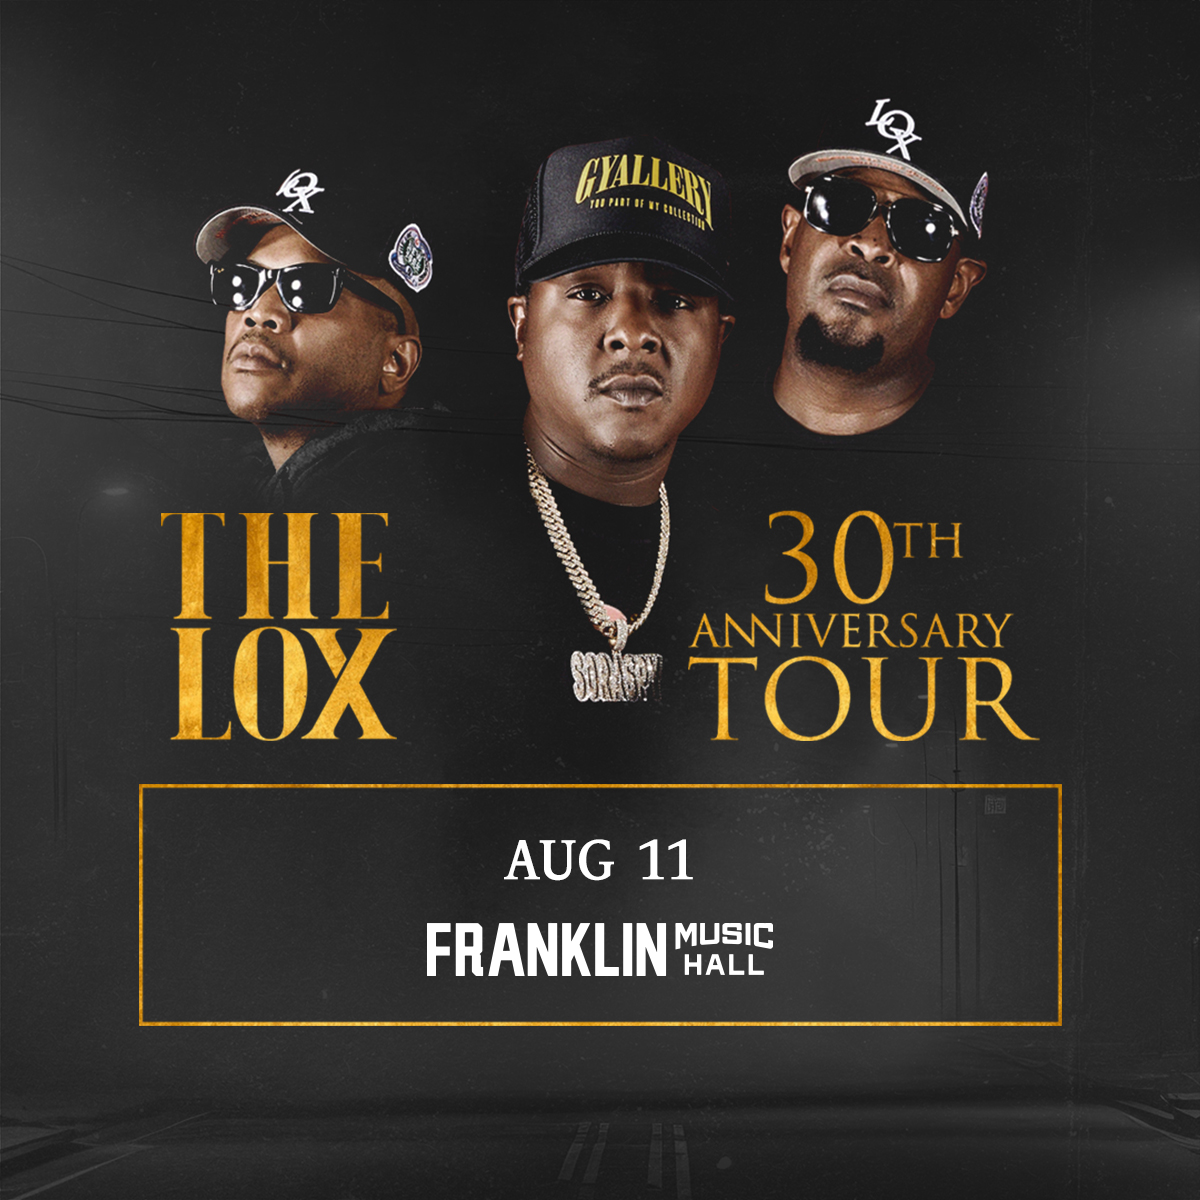 MONEY POWER RESPECT! So excited to announce @thelox will celebrate 30 years here on August 11th. Venue presale starts tomorrow at 10am, public on sale this Thursday at 10am.